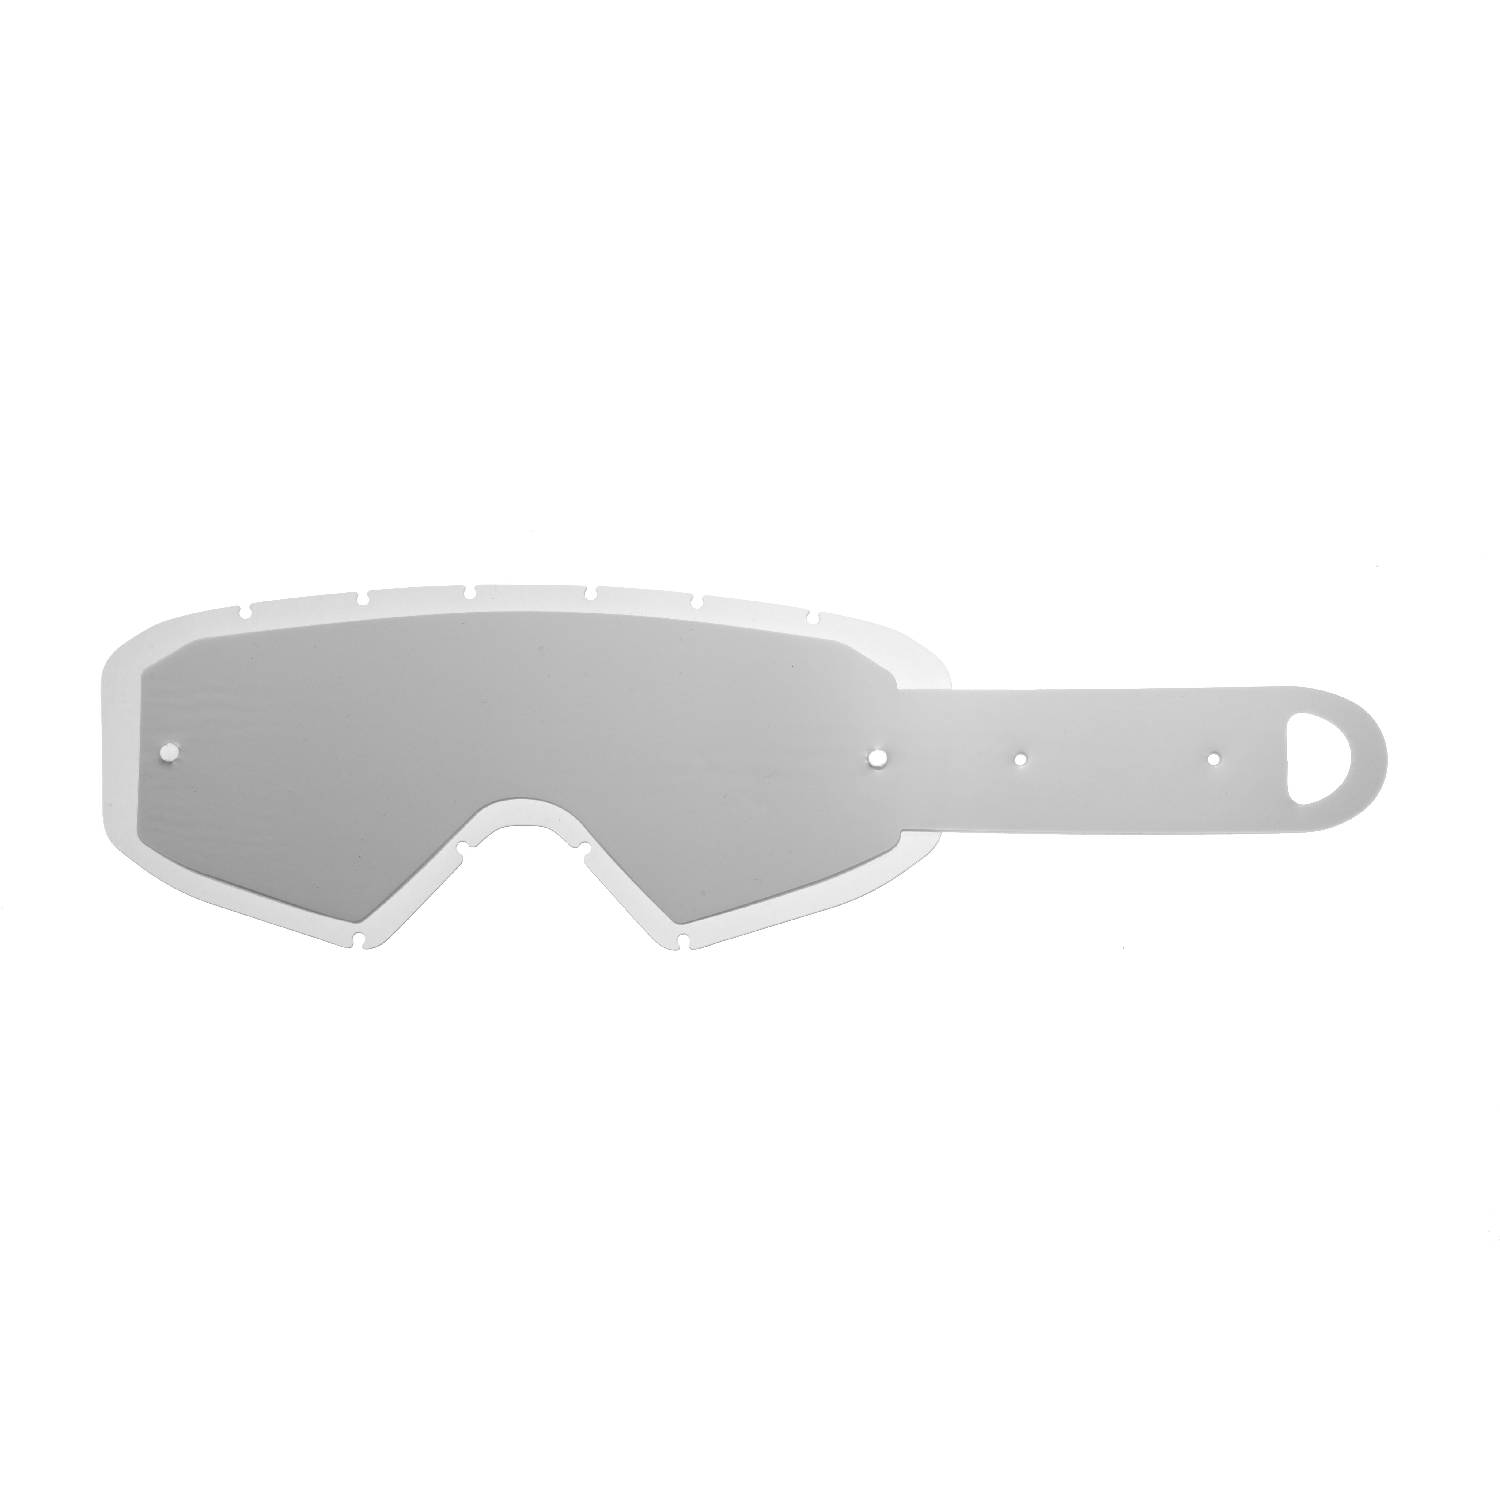 combo lenses with clear lenses with 10 tear off compatible for Ethen Zerocinque Primis / R / Ares / Ares Pluma cross goggles / goggles